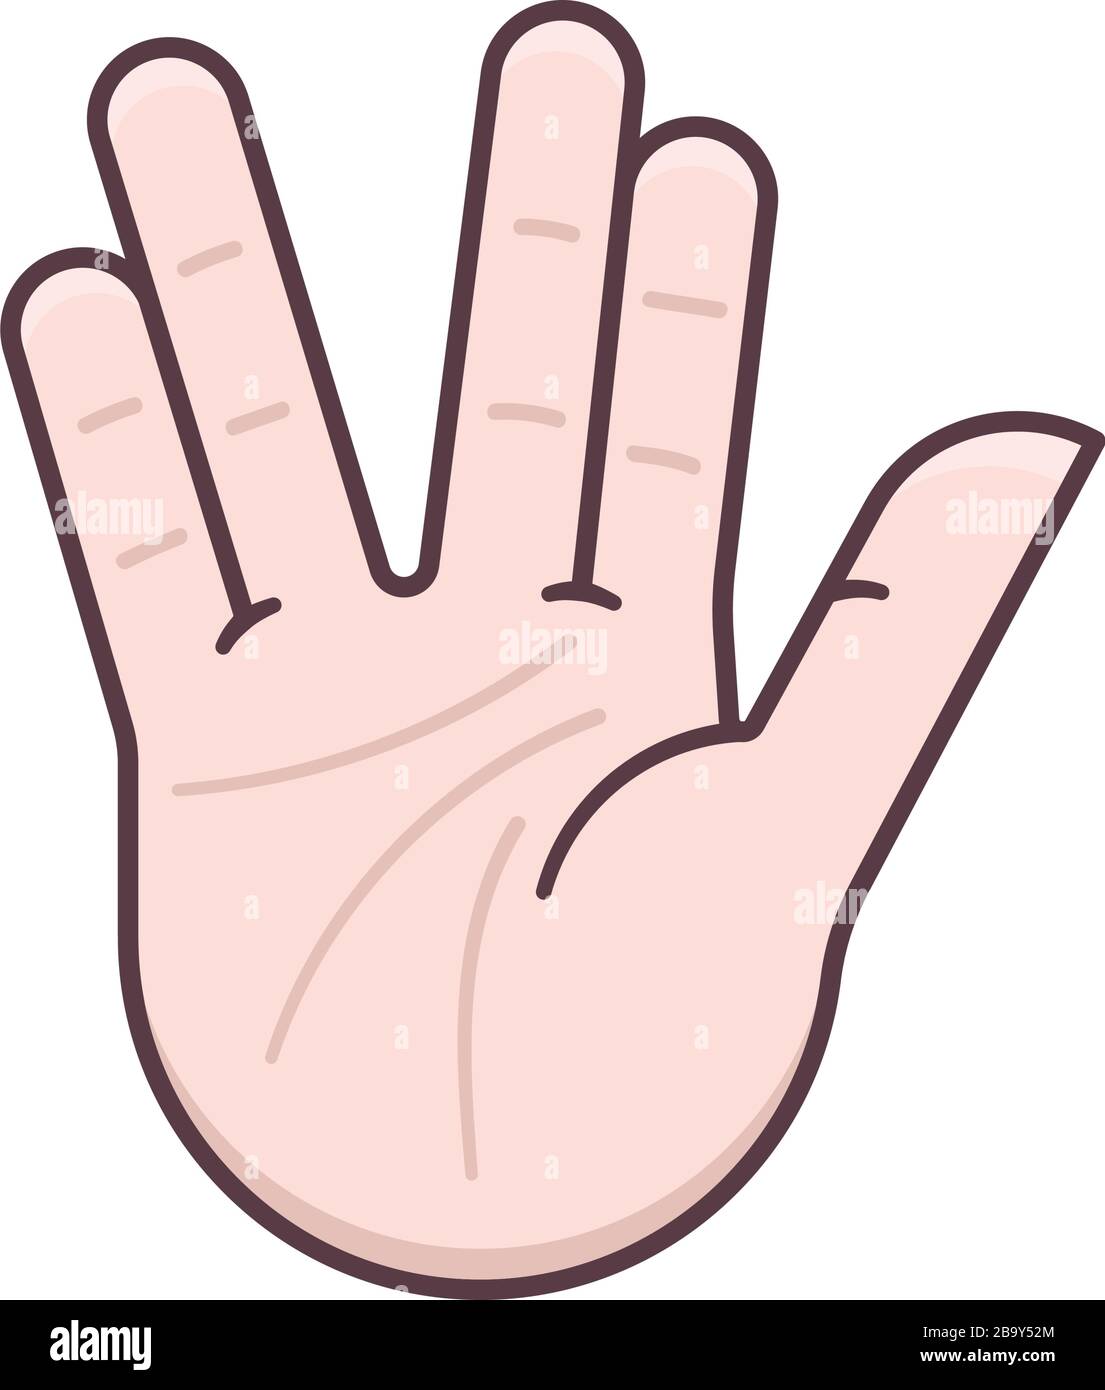 Vulcan salute hand gesture isolated vector illustration for Star Trek First Contact Day on April 5th. Science Fiction appreciation symbol. Stock Vector